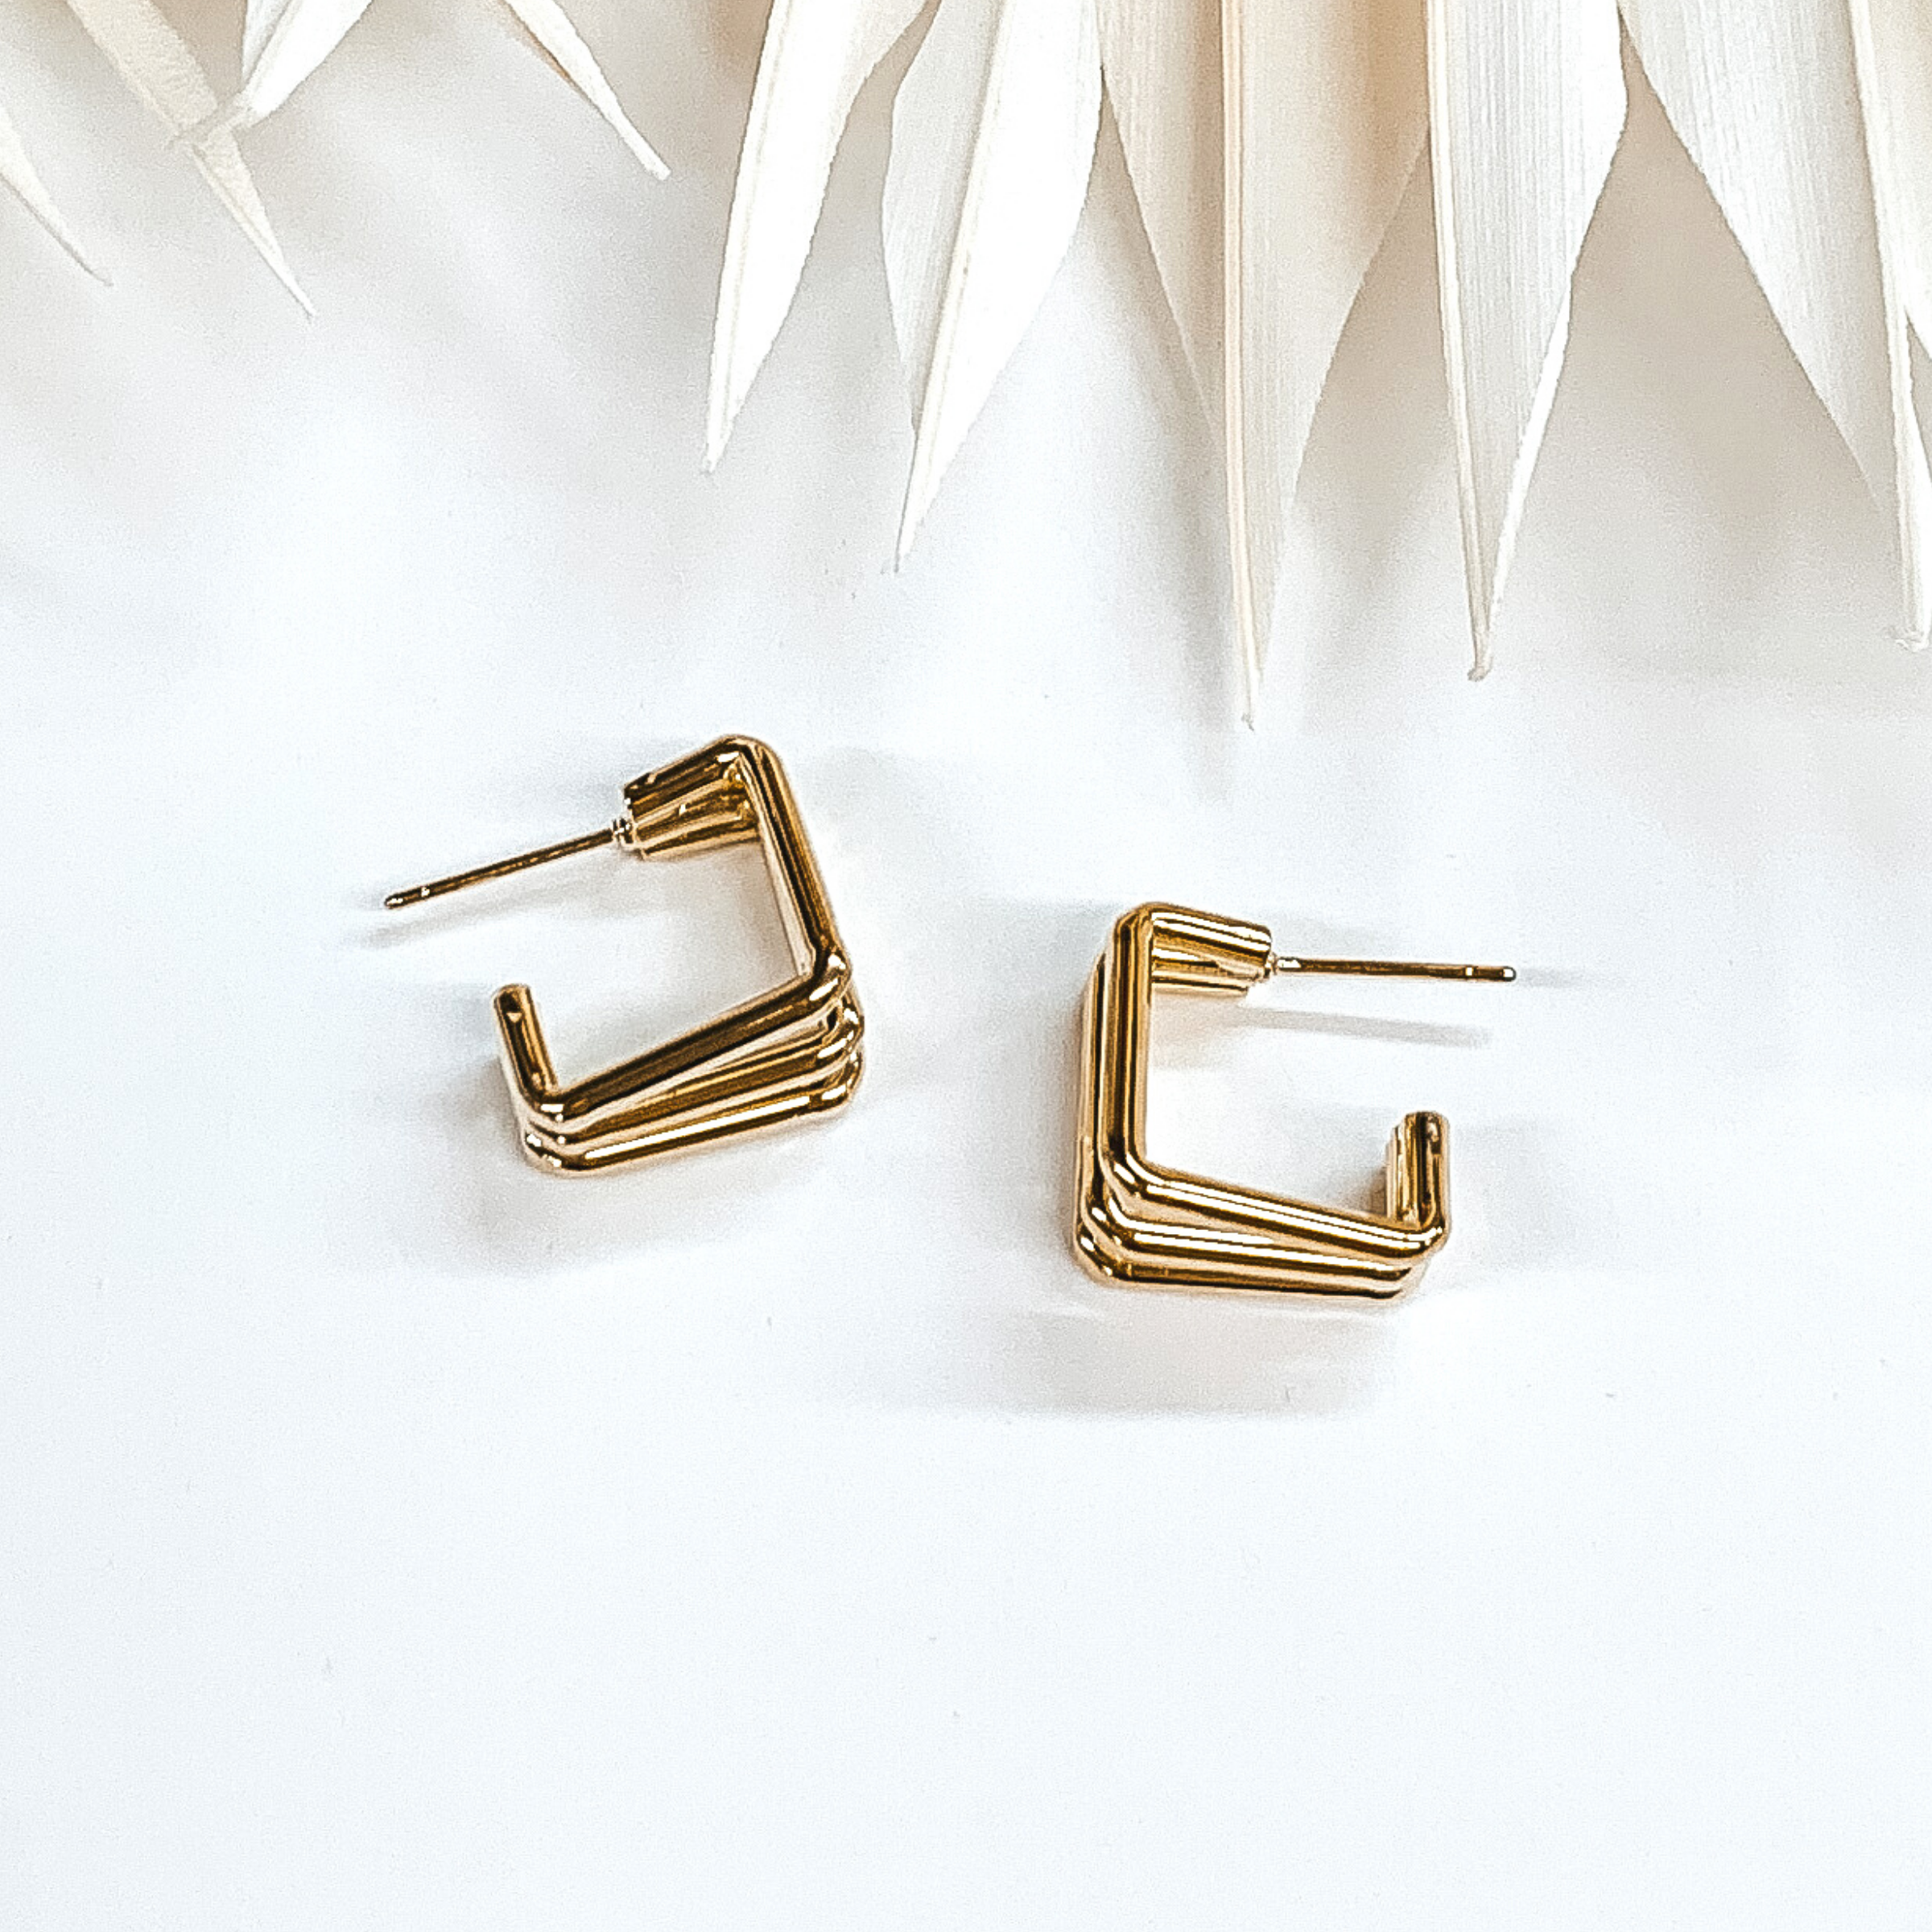 Triple Square Hoop Earrings in Gold Tone - Giddy Up Glamour Boutique